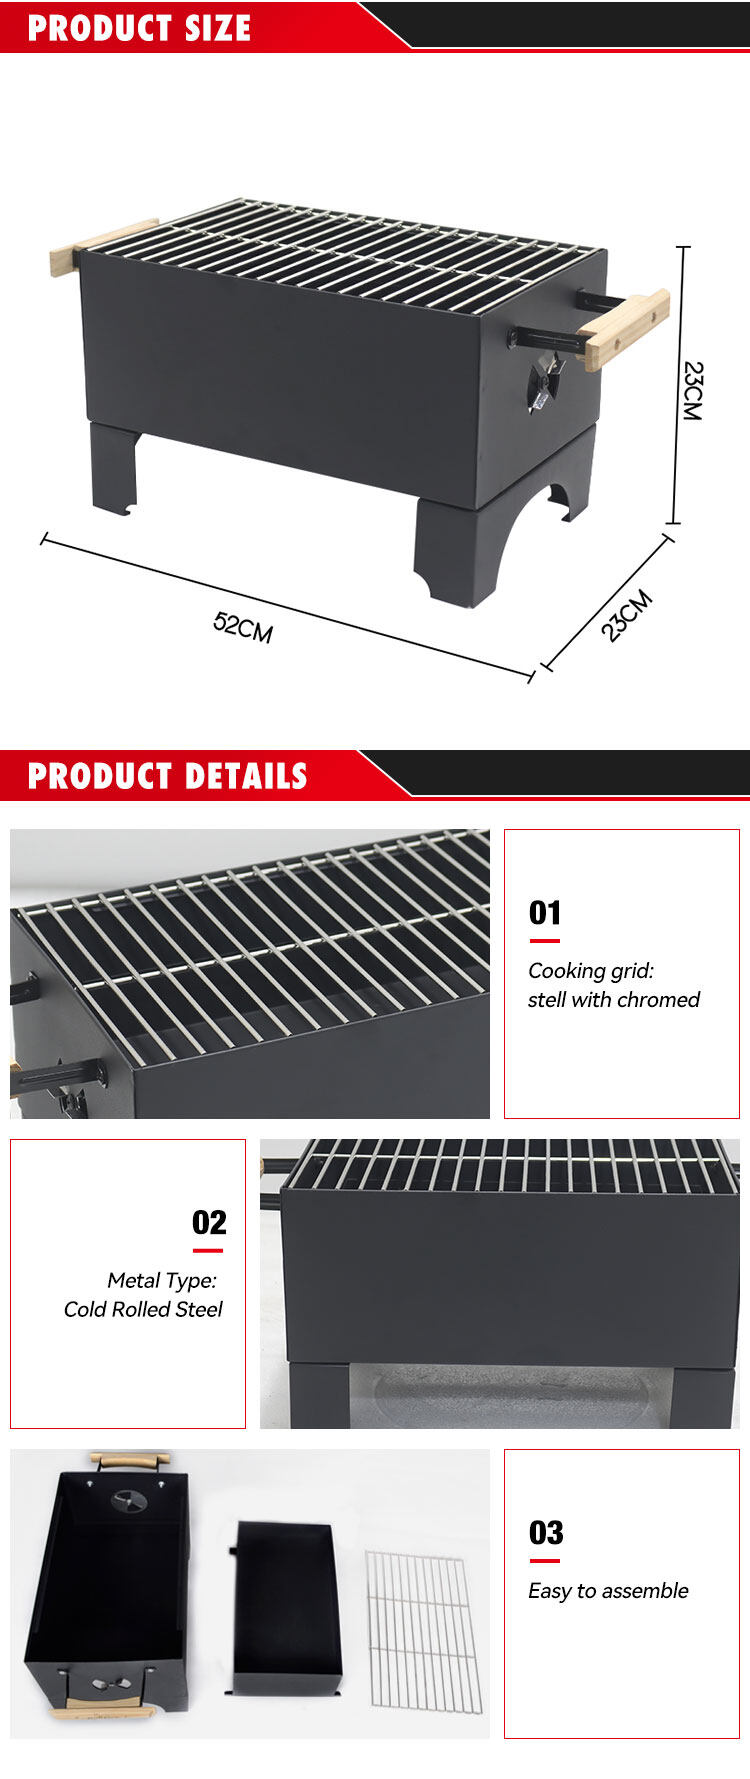 Product Detail of KY1209 Portable BBQ Grill (3).jpg